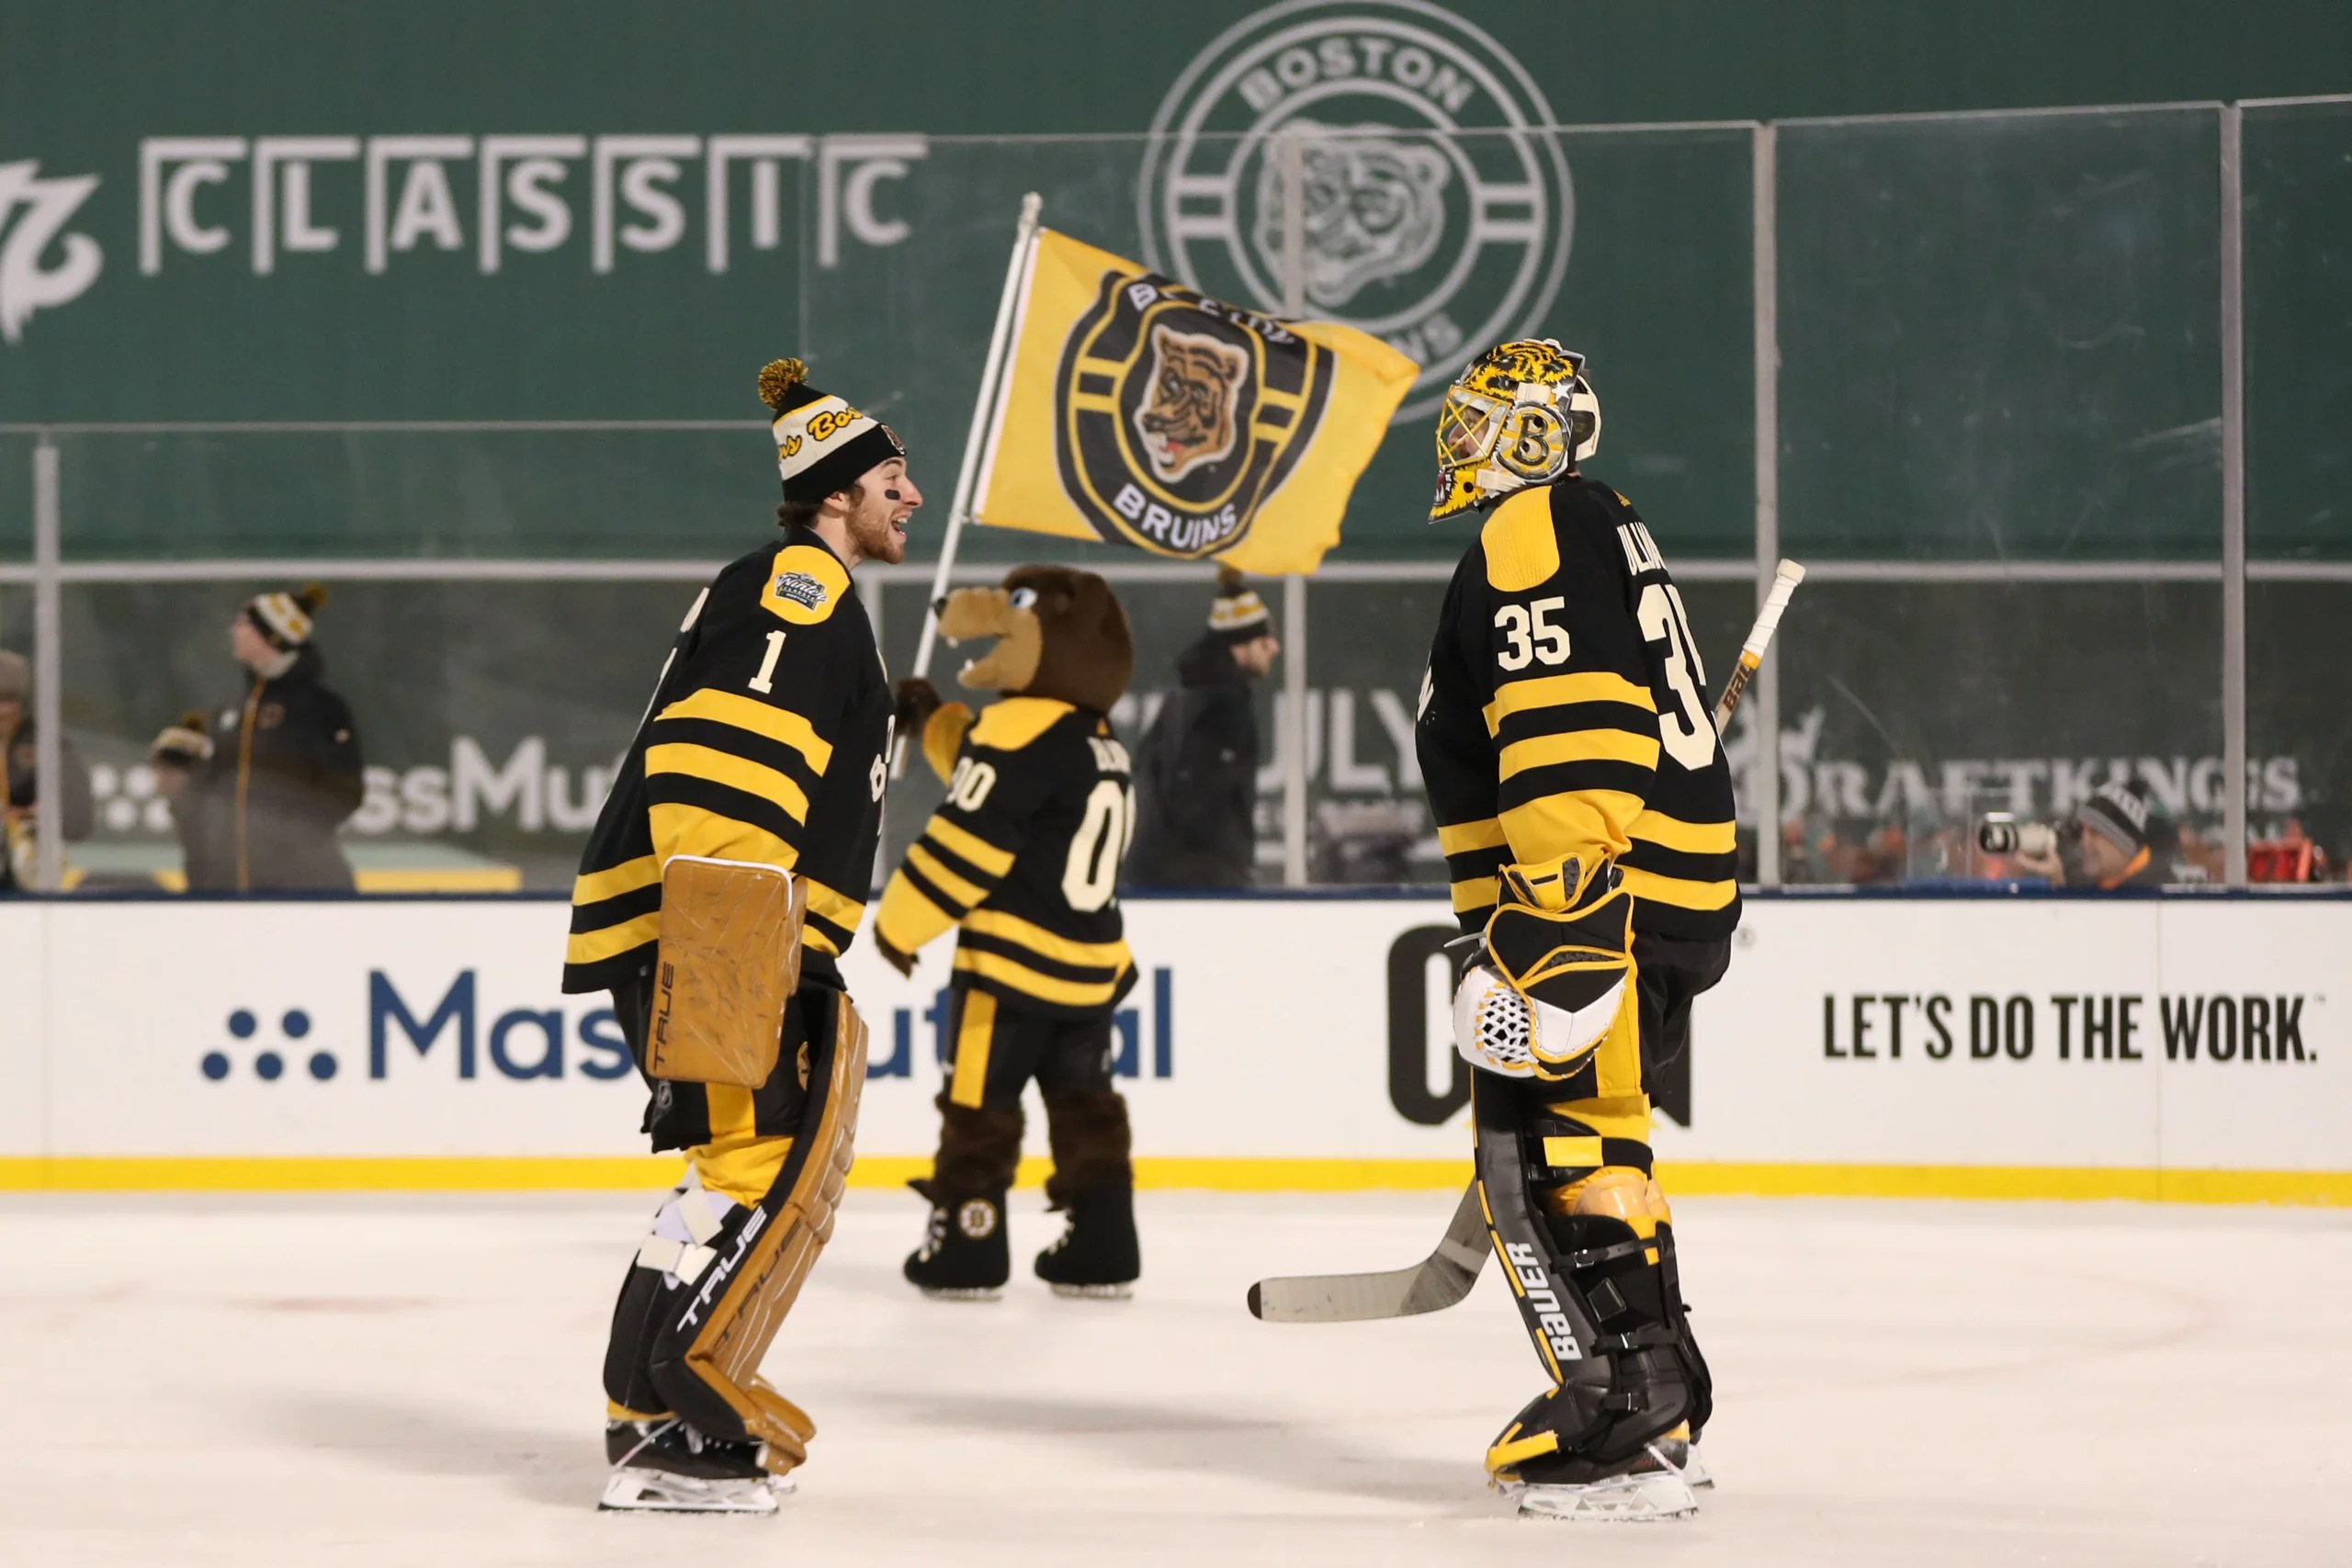 3 takeaways from the Boston Bruins, Pittsburgh Penguins Winter Classic